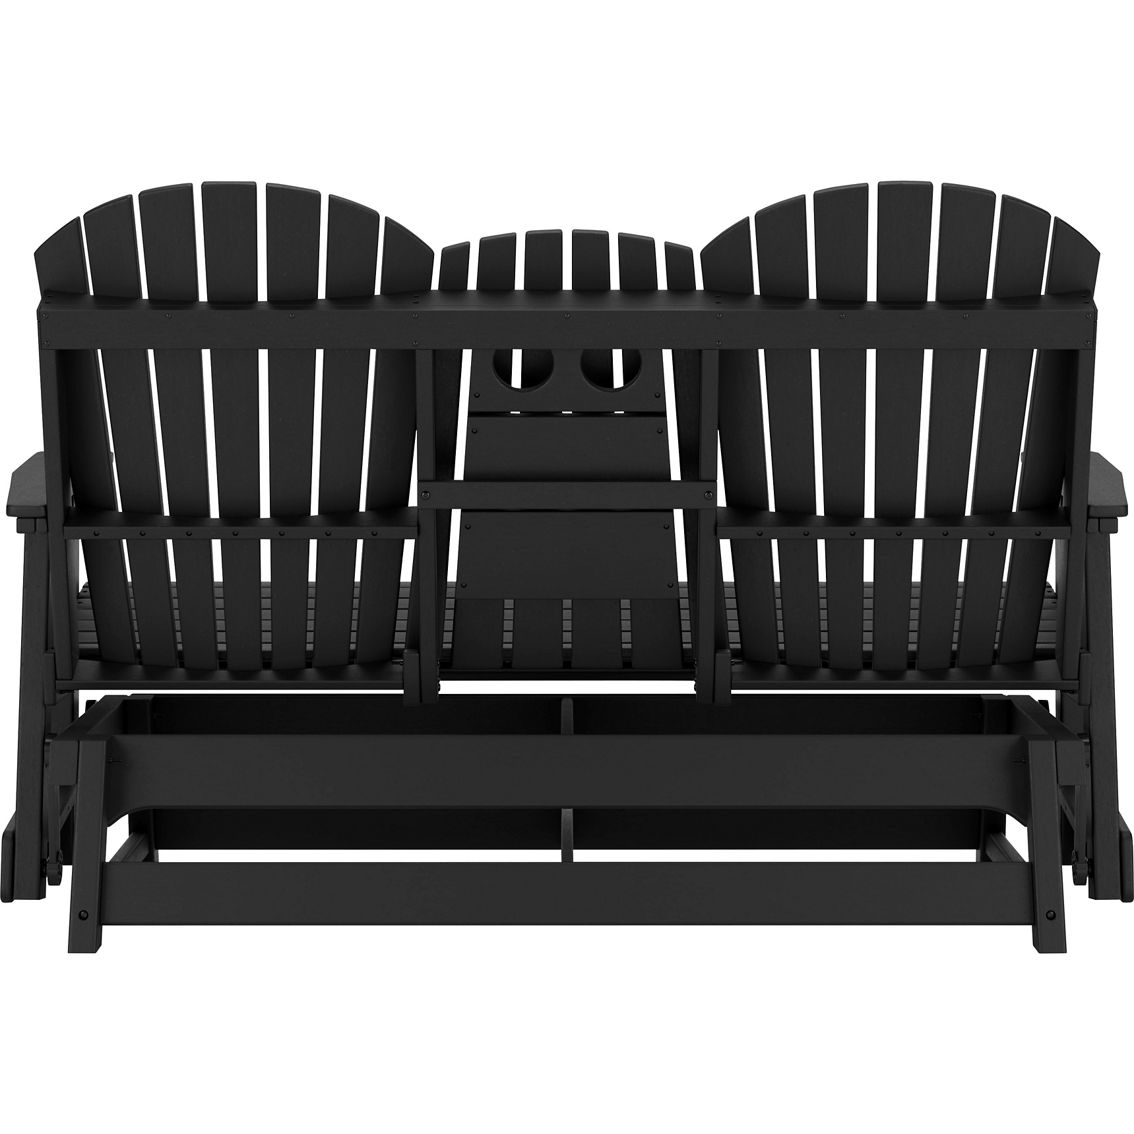 Signature Design by Ashley Hyland Wave Outdoor Glider Loveseat - Image 3 of 7